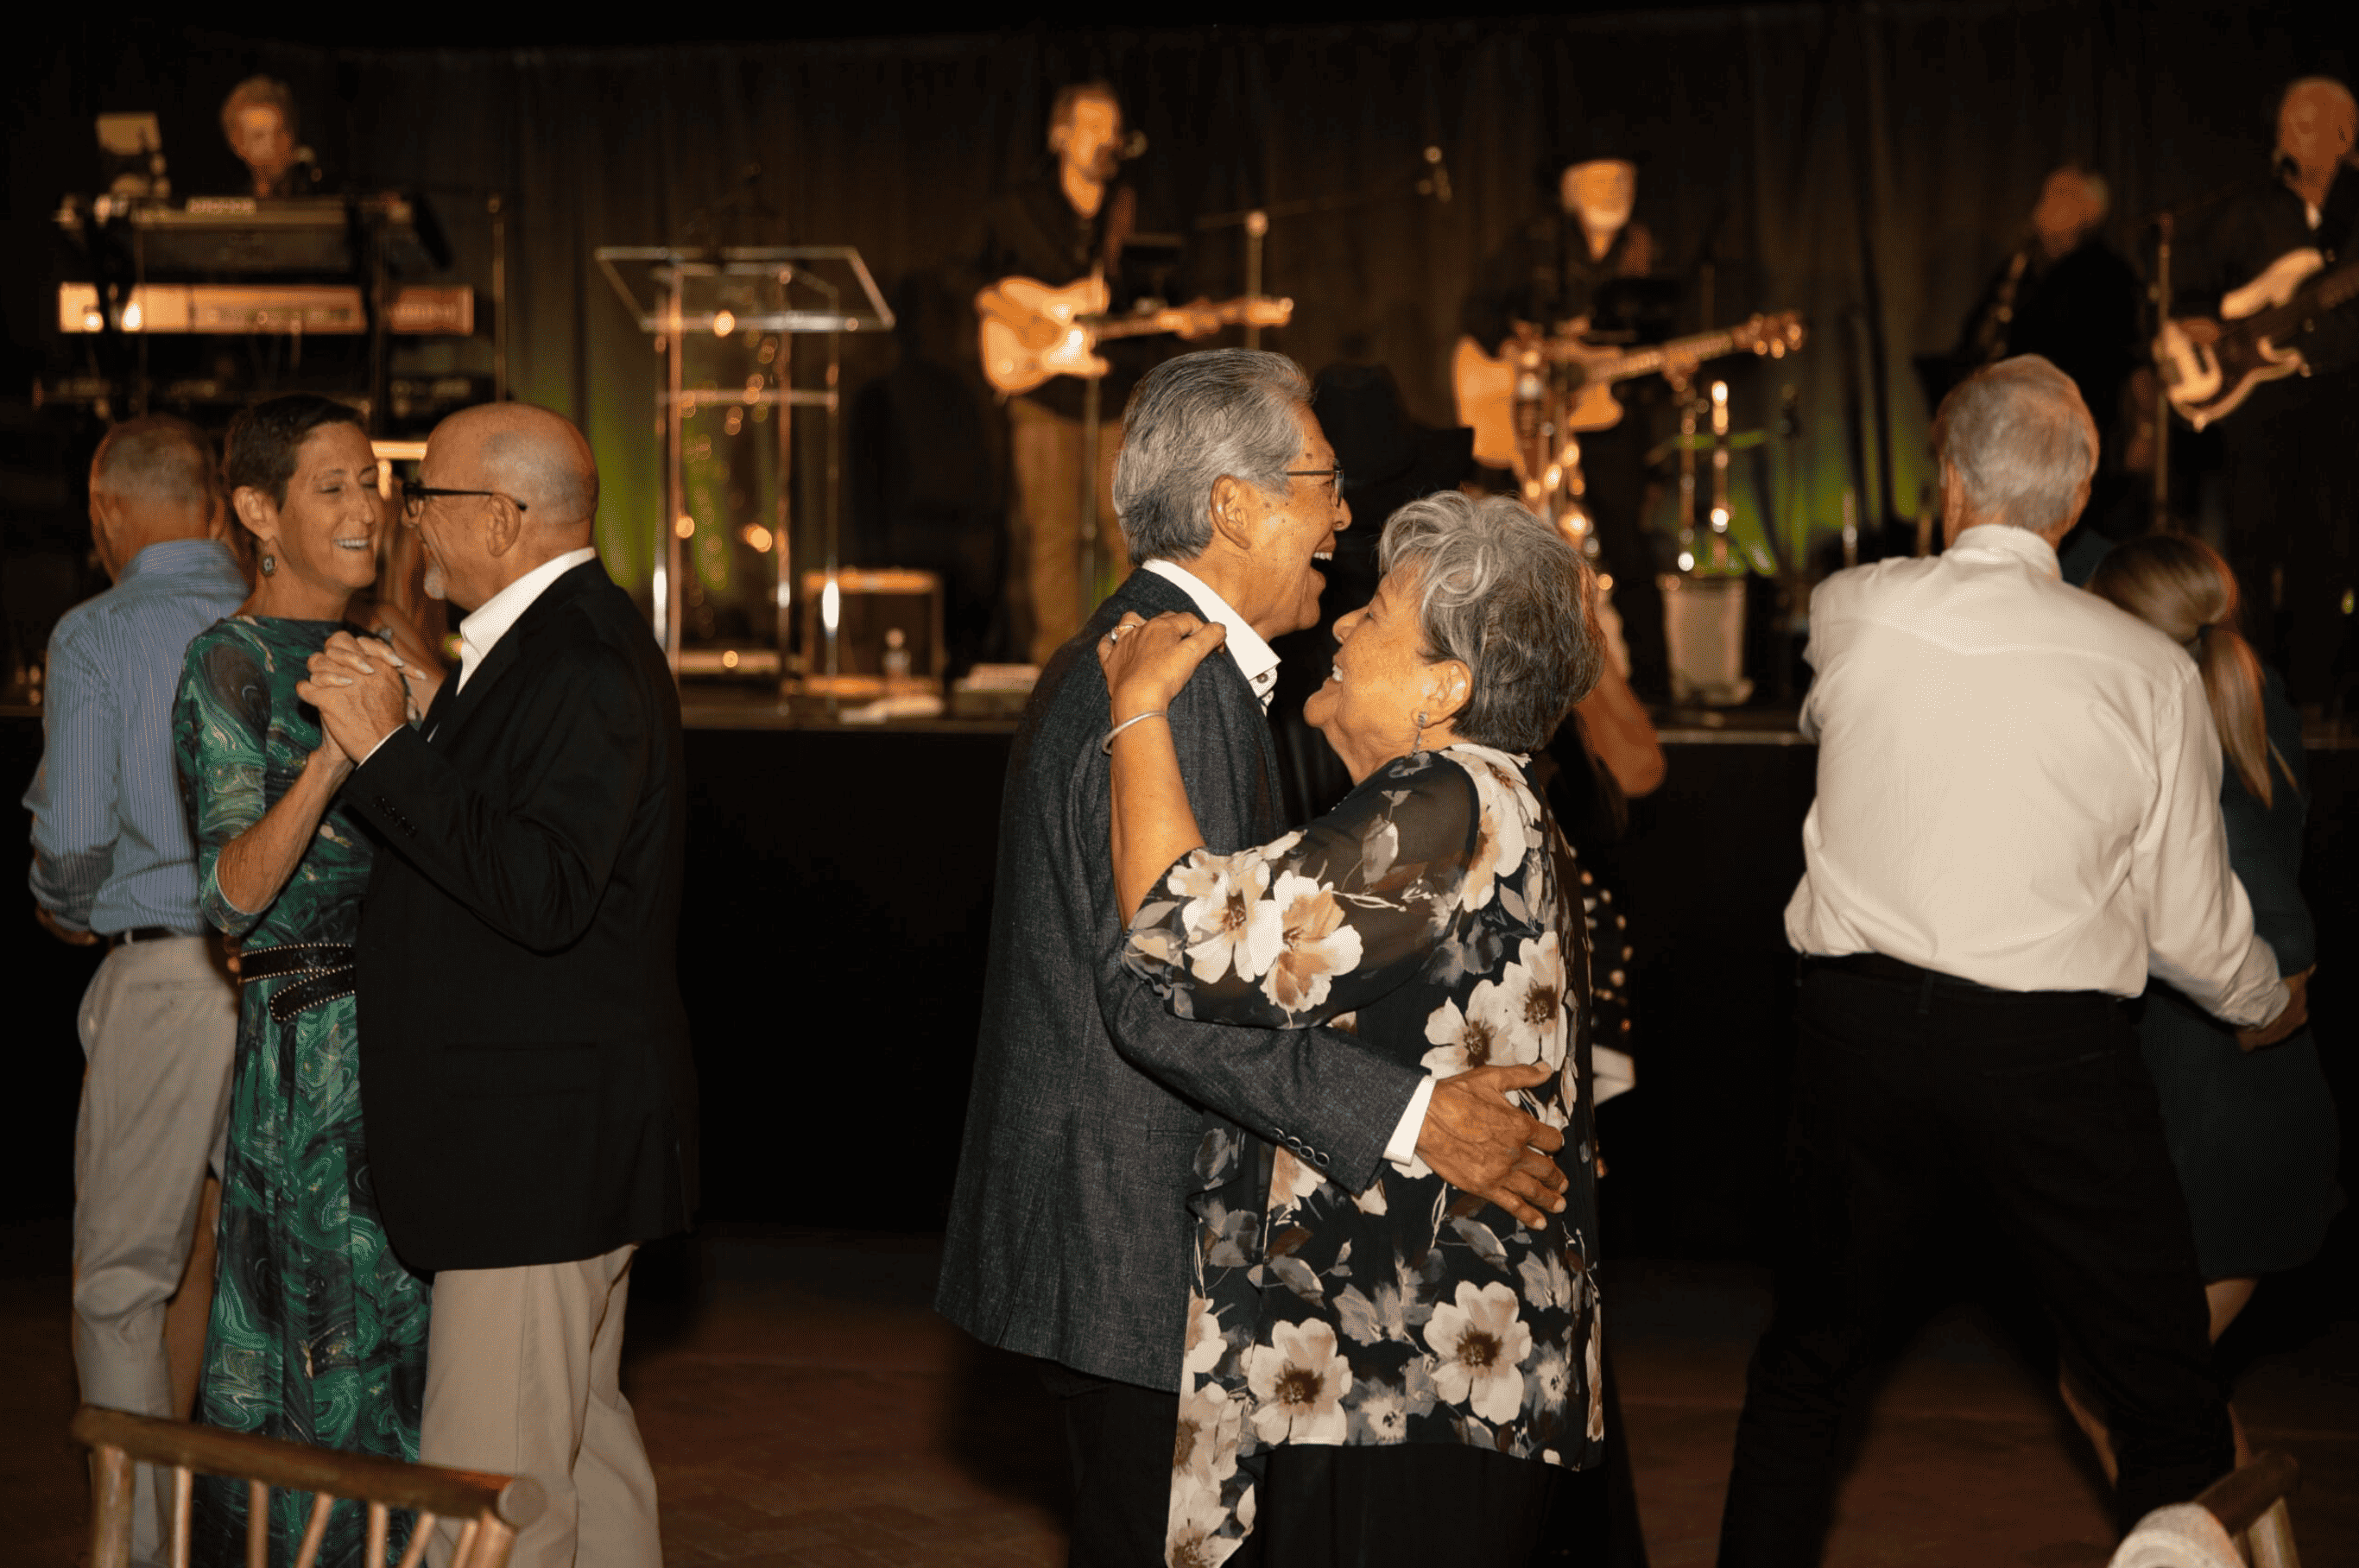 Couples dancing together at a ballroom event with a live band playing "Moondance" in the background.